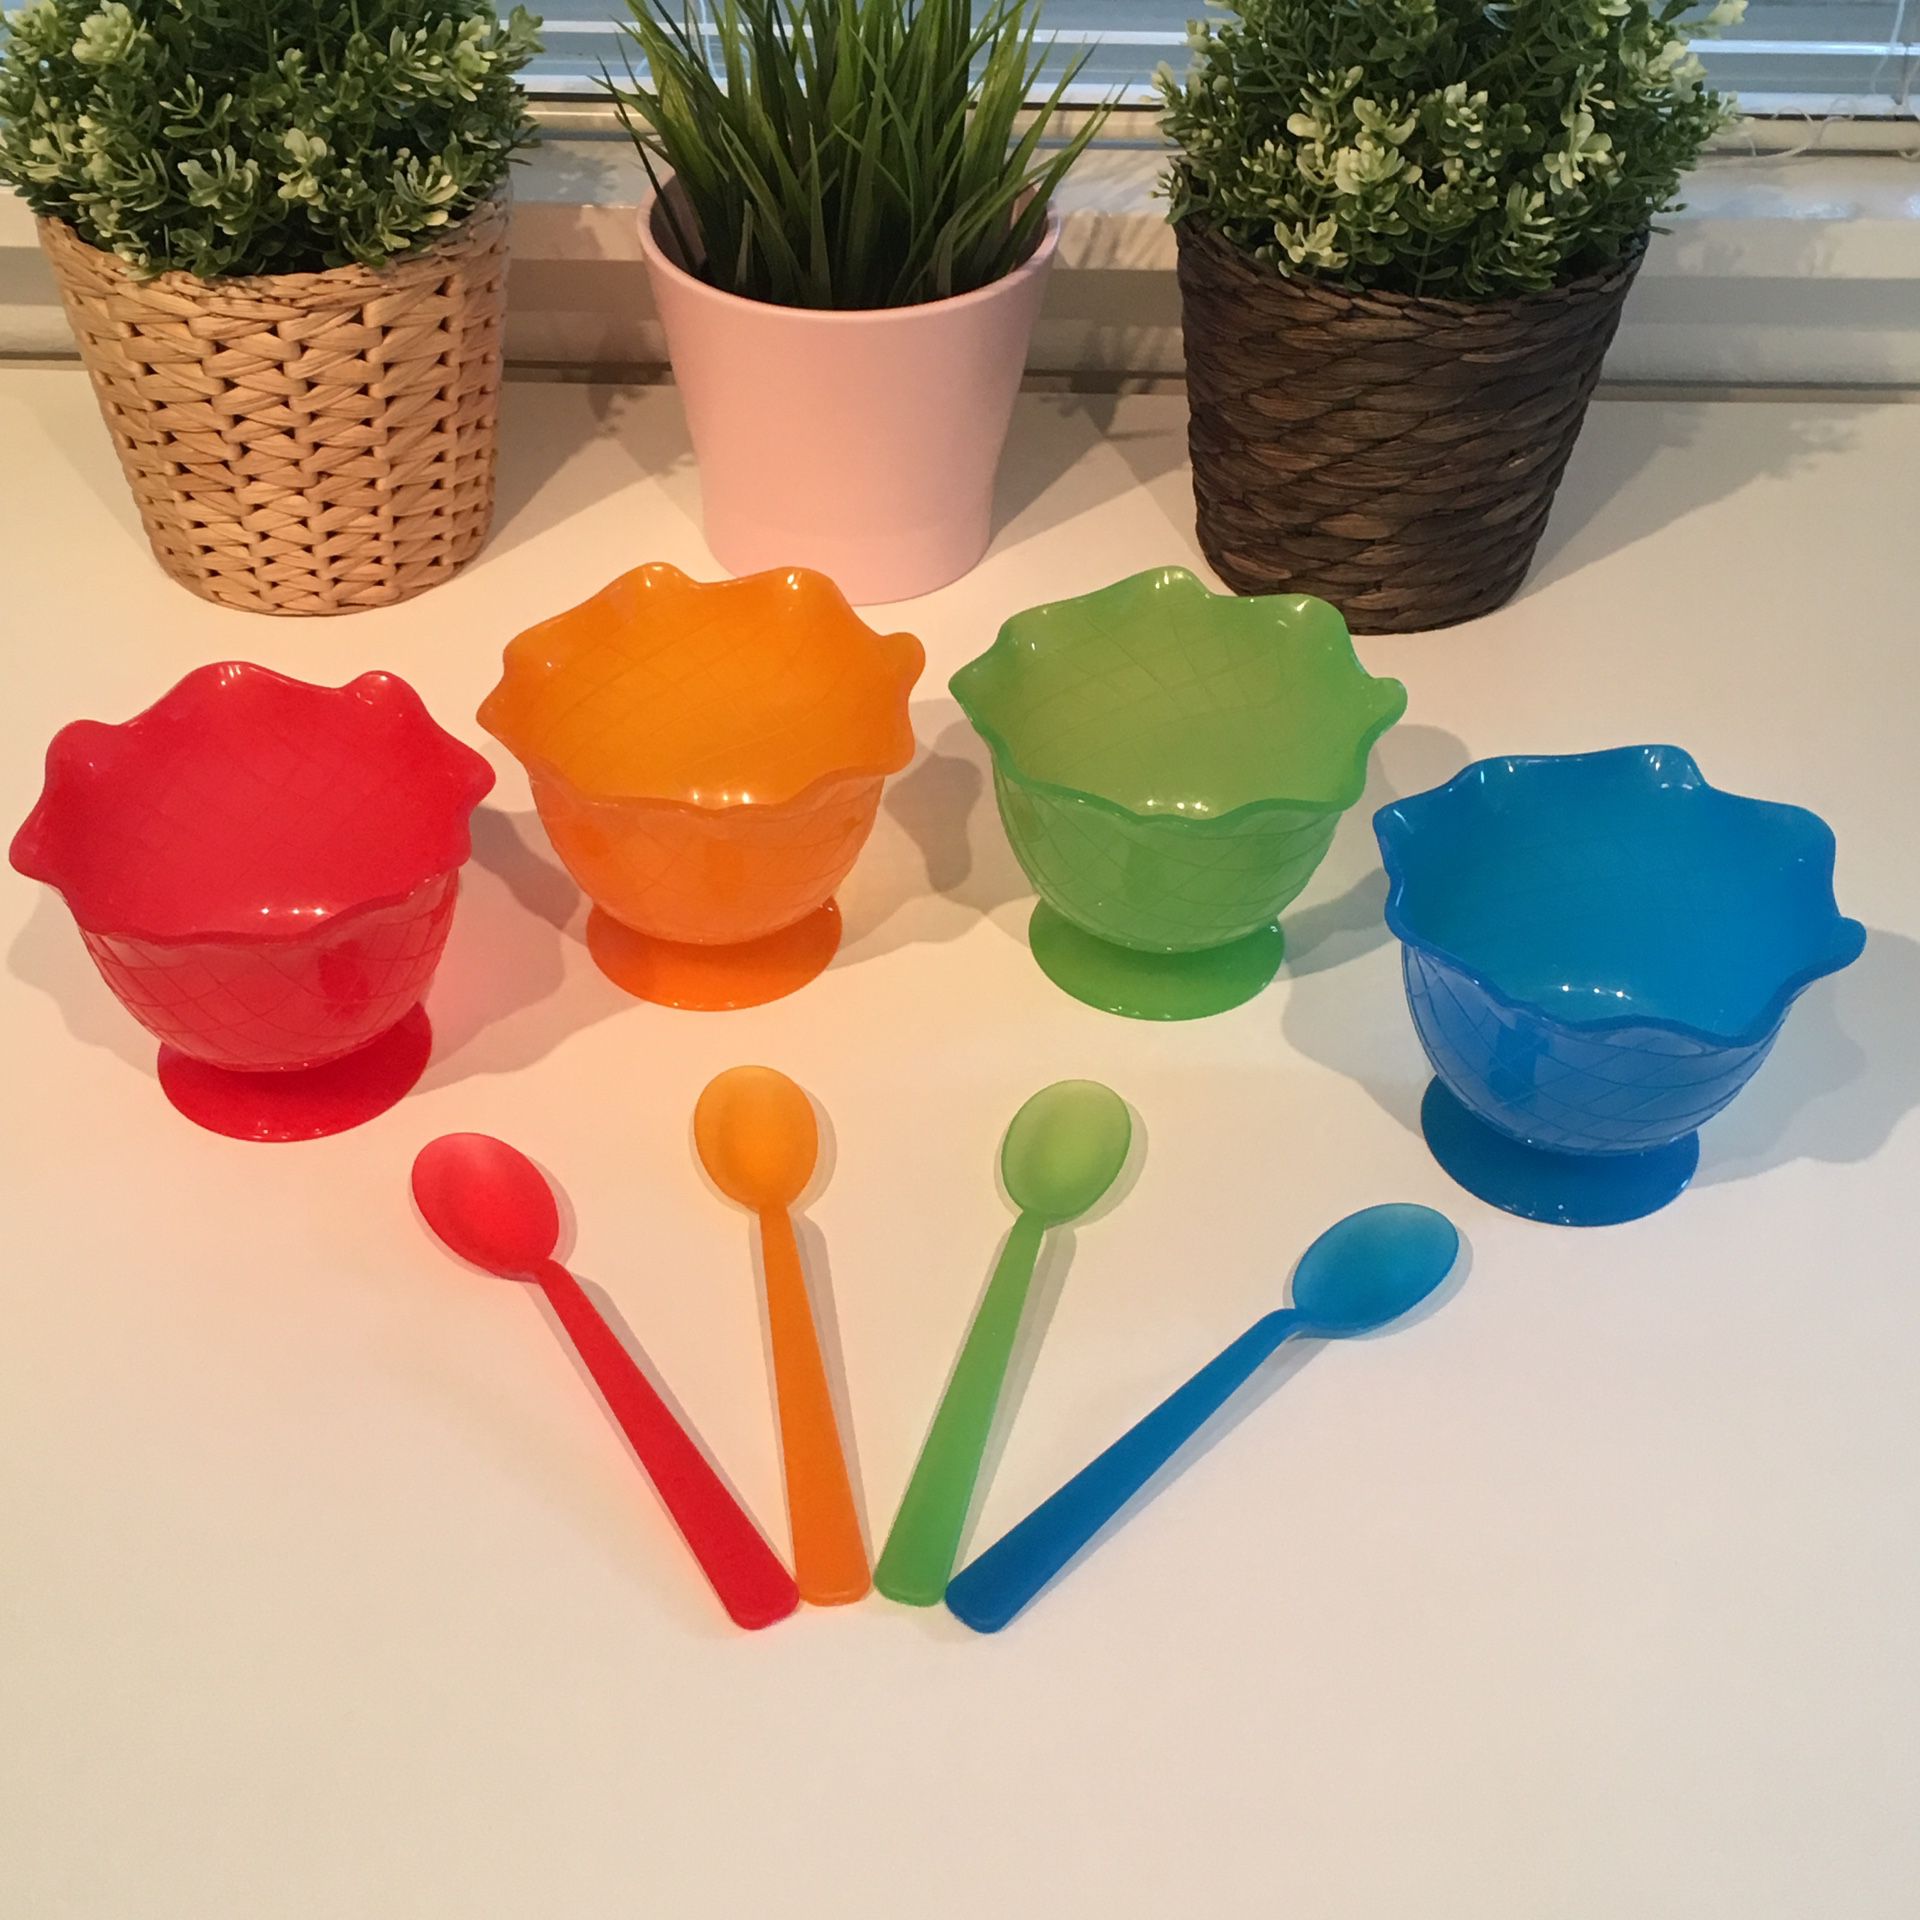 Kitchen Ice Cream Colorful Cup Set with Spoons